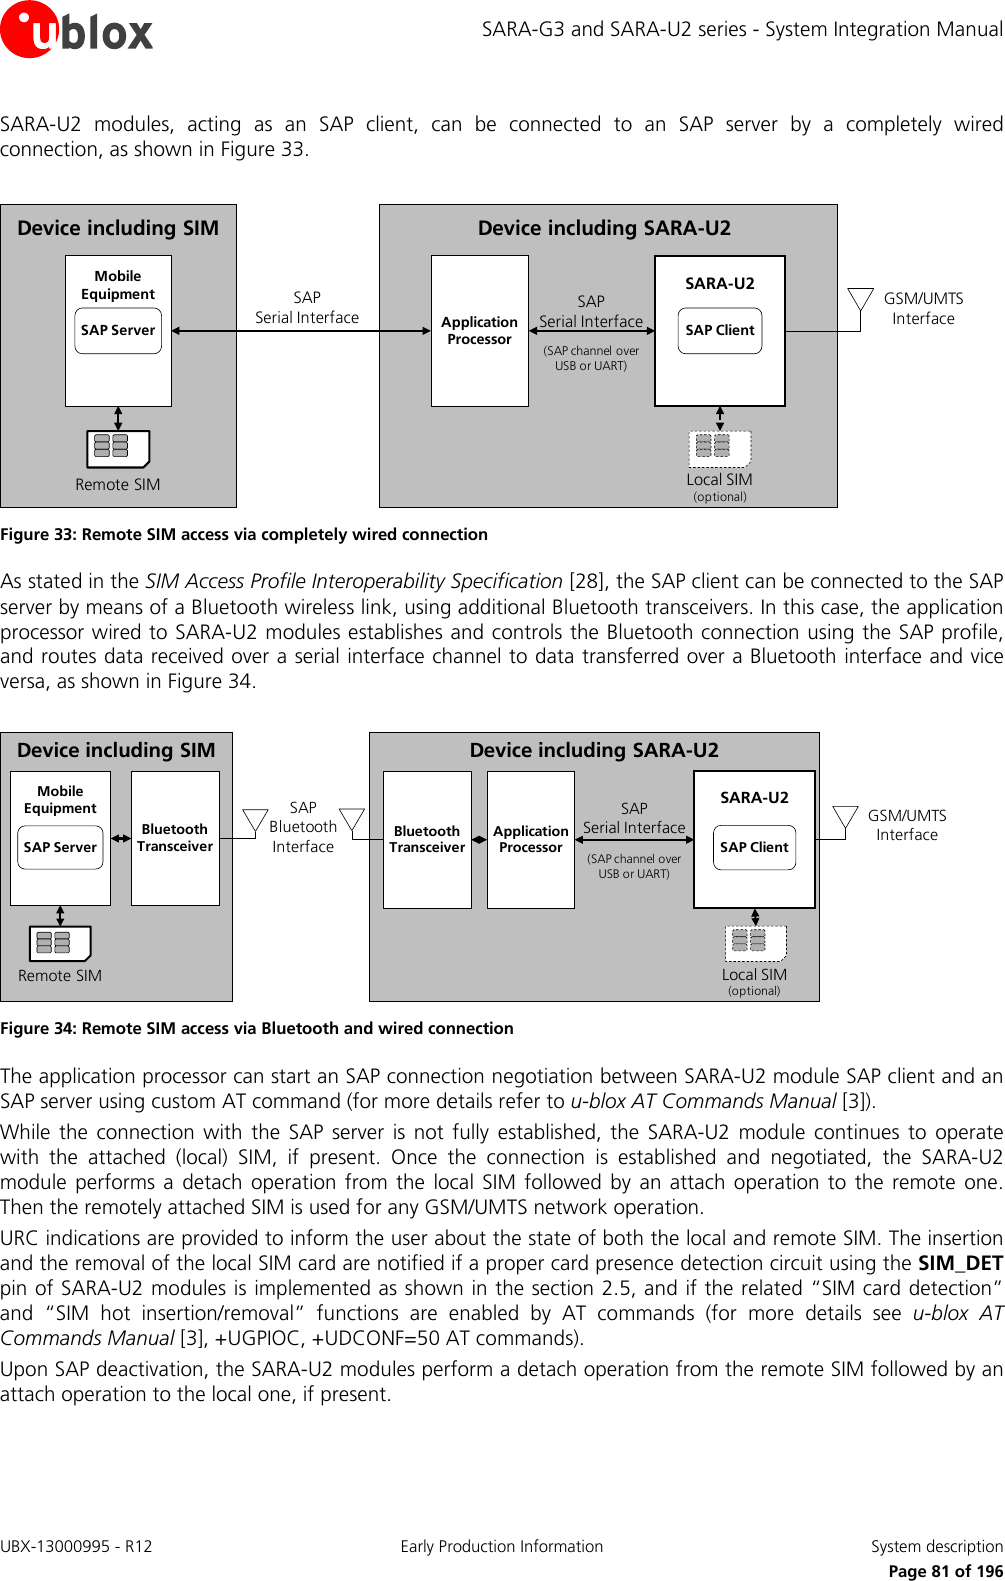 SARA-G3 and SARA-U2 series - System Integration Manual SARA-U2  modules, acting as an SAP client, can be connected to an SAP server by a completely wired connection, as shown in Figure 33.  Device including SARA-U2 GSM/UMTS InterfaceSAP             Serial Interface(SAP channel  over USB or UART)Local SIM(optional)SARA-U2SAP ClientApplicationProcessorDevice including SIMSAP                   Serial InterfaceRemote SIMMobileEquipmentSAP Server Figure 33: Remote SIM access via completely wired connection As stated in the SIM Access Profile Interoperability Specification [28], the SAP client can be connected to the SAP server by means of a Bluetooth wireless link, using additional Bluetooth transceivers. In this case, the application processor wired to SARA-U2 modules establishes and controls the Bluetooth connection using the SAP profile, and routes data received over a serial interface channel to data transferred over a Bluetooth interface and vice versa, as shown in Figure 34.  Device including SARA-U2SAP              Serial Interface(SAP channel o ver   USB or UART)GSM/UMTS InterfaceLocal SIM(optional)SARA-U2SAP ClientApplicationProcessorSAP  Bluetooth InterfaceBluetoothTransceiverDevice including SIMRemote SIMMobileEquipmentSAP ServerBluetoothTransceiver Figure 34: Remote SIM access via Bluetooth and wired connection The application processor can start an SAP connection negotiation between SARA-U2 module SAP client and an SAP server using custom AT command (for more details refer to u-blox AT Commands Manual [3]). While the connection with the SAP server is not fully established, the SARA-U2  module continues to operate with the attached (local) SIM, if present. Once the connection is established and negotiated, the SARA-U2 module performs a detach operation from the local SIM followed by an attach operation to the remote one. Then the remotely attached SIM is used for any GSM/UMTS network operation. URC indications are provided to inform the user about the state of both the local and remote SIM. The insertion and the removal of the local SIM card are notified if a proper card presence detection circuit using the SIM_DET pin of SARA-U2 modules is implemented as shown in the section 2.5, and if the related “SIM card detection” and “SIM hot insertion/removal” functions are enabled by AT commands (for more details see u-blox AT Commands Manual [3], +UGPIOC, +UDCONF=50 AT commands). Upon SAP deactivation, the SARA-U2 modules perform a detach operation from the remote SIM followed by an attach operation to the local one, if present.  UBX-13000995 - R12 Early Production Information System description     Page 81 of 196 